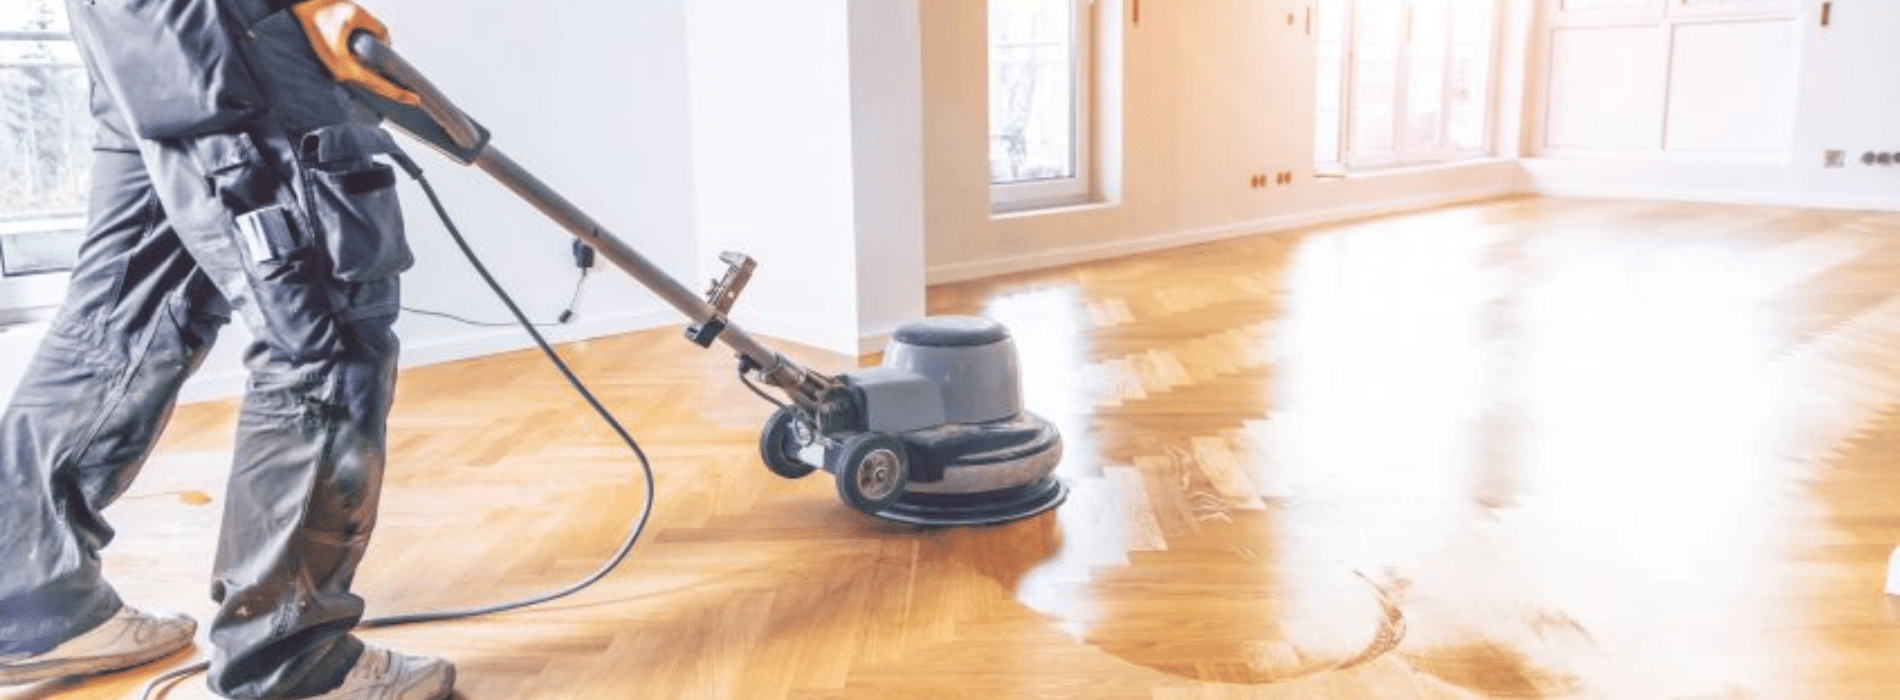 In Raynes  Park, SW20, Mr Sander® use the Bona FlexiSand 1.5 buffer sander (Ø 407 mm, 1.5 kW) on a parquet floor. The sander operates at 230V with a frequency of 50 Hz/60 Hz. It is connected to a dust extraction system with a HEPA filter, ensuring a clean and efficient sanding process.